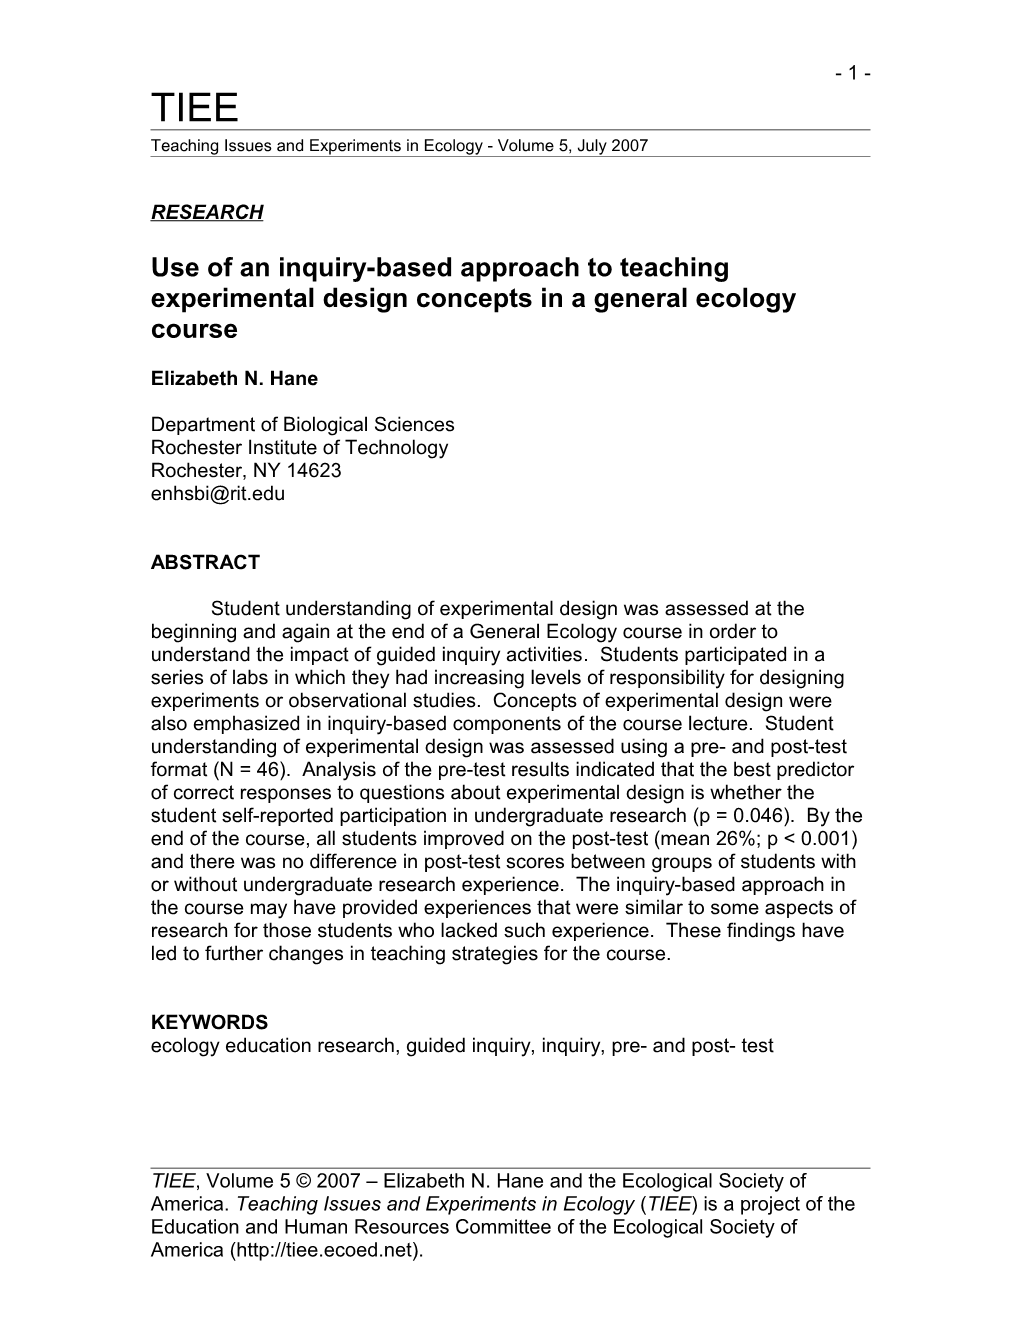 Pedagogical Assessment of Experimental Design Concepts in Ecology